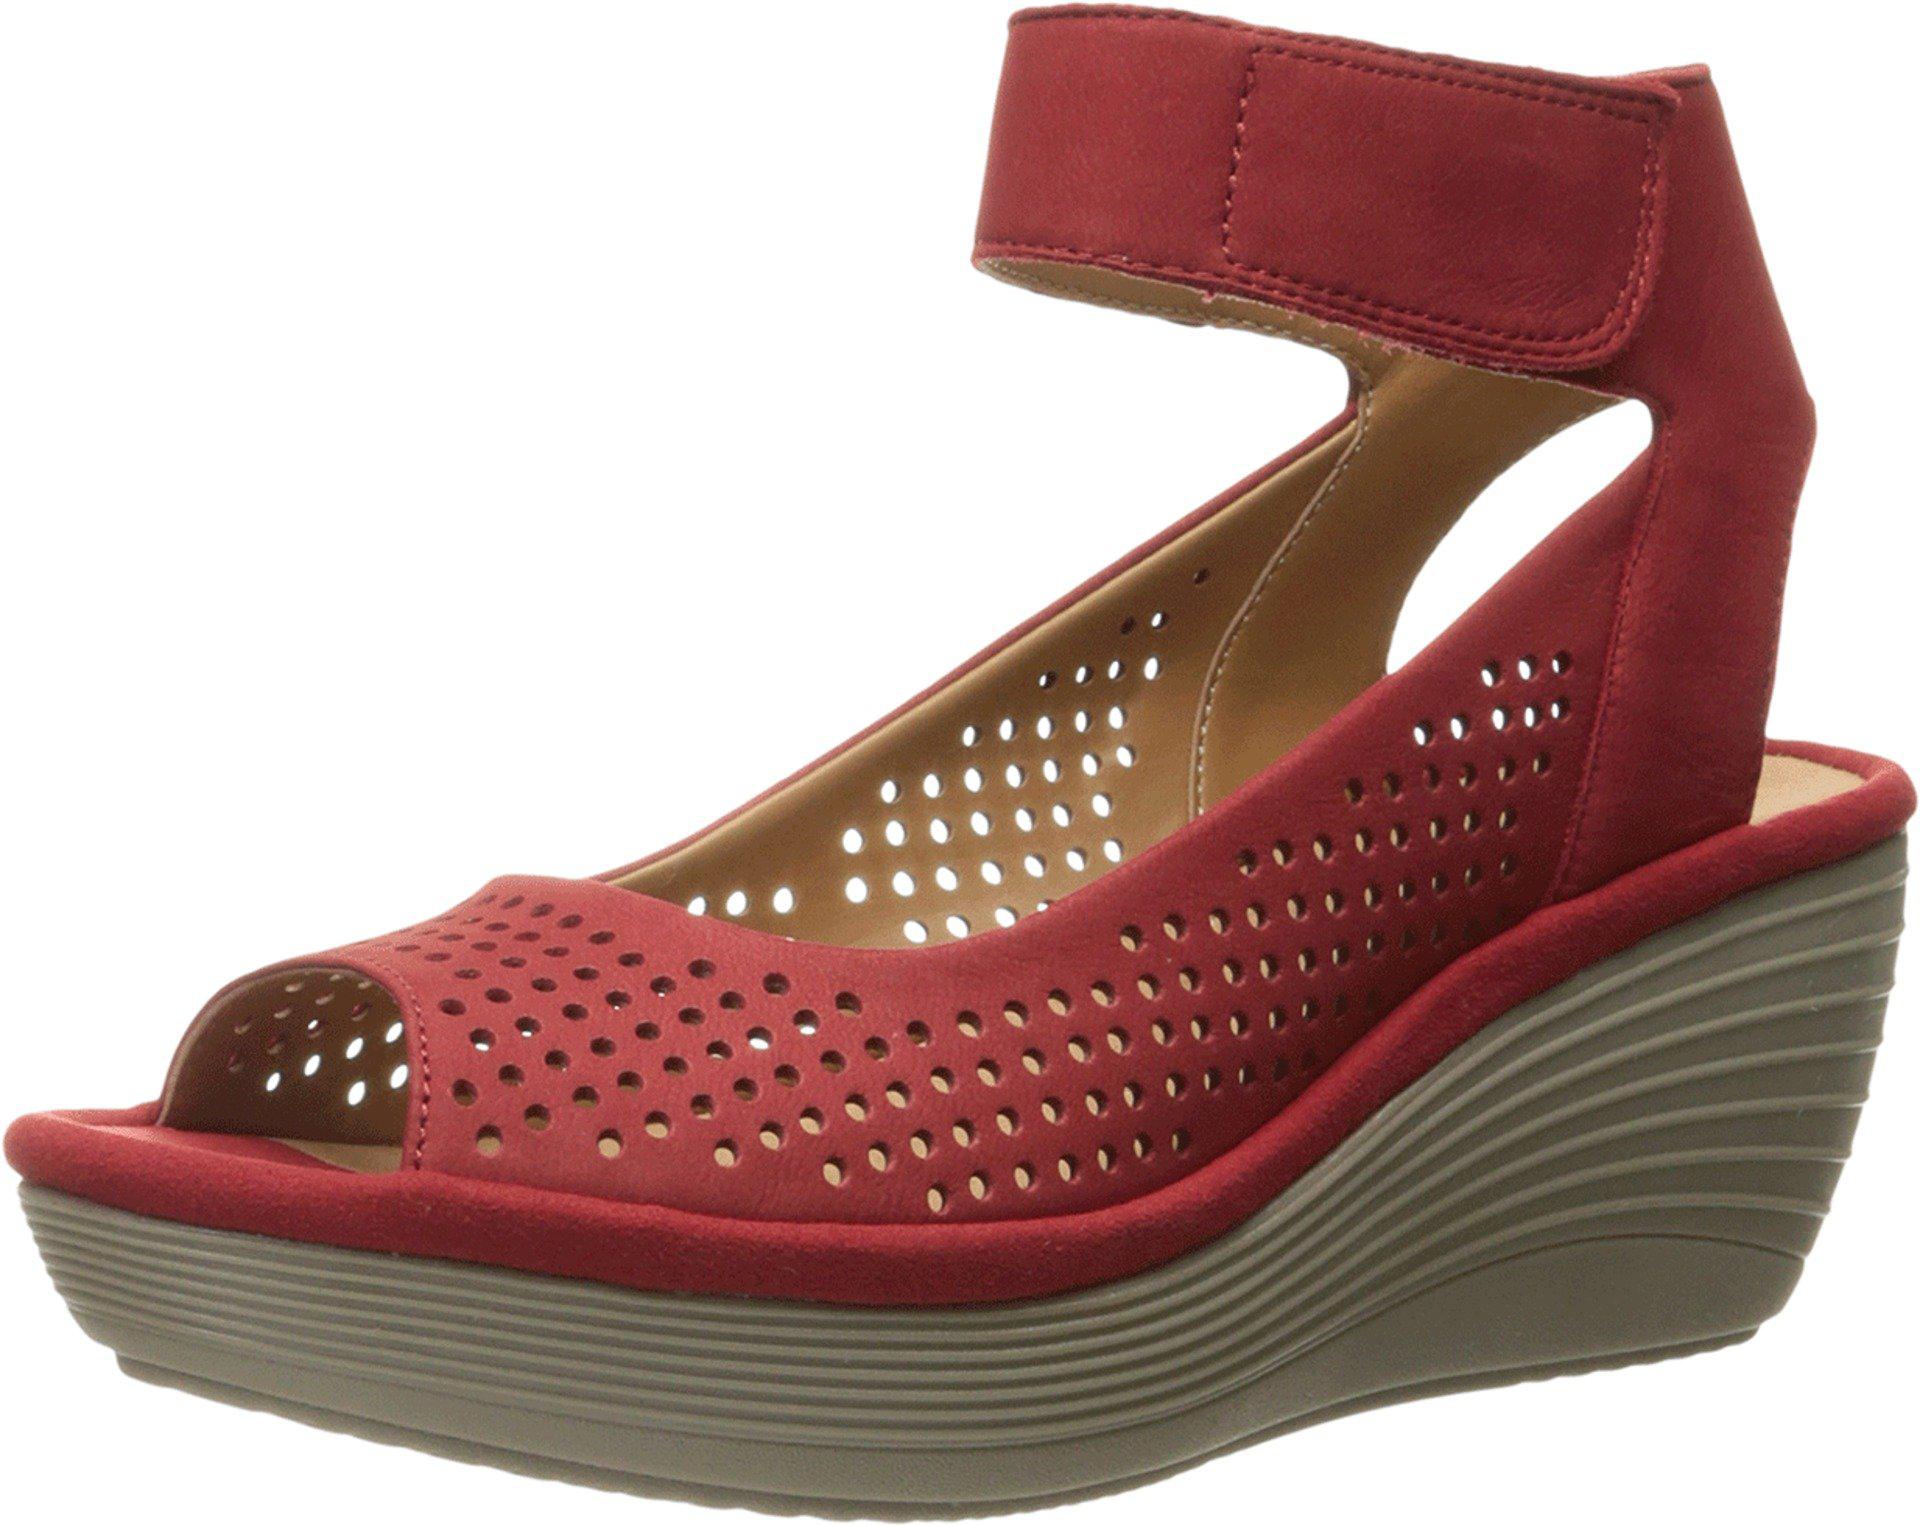 Clarks Leather Reedly Salene Wedge Sandal in Red Nubuck (Red) - Lyst